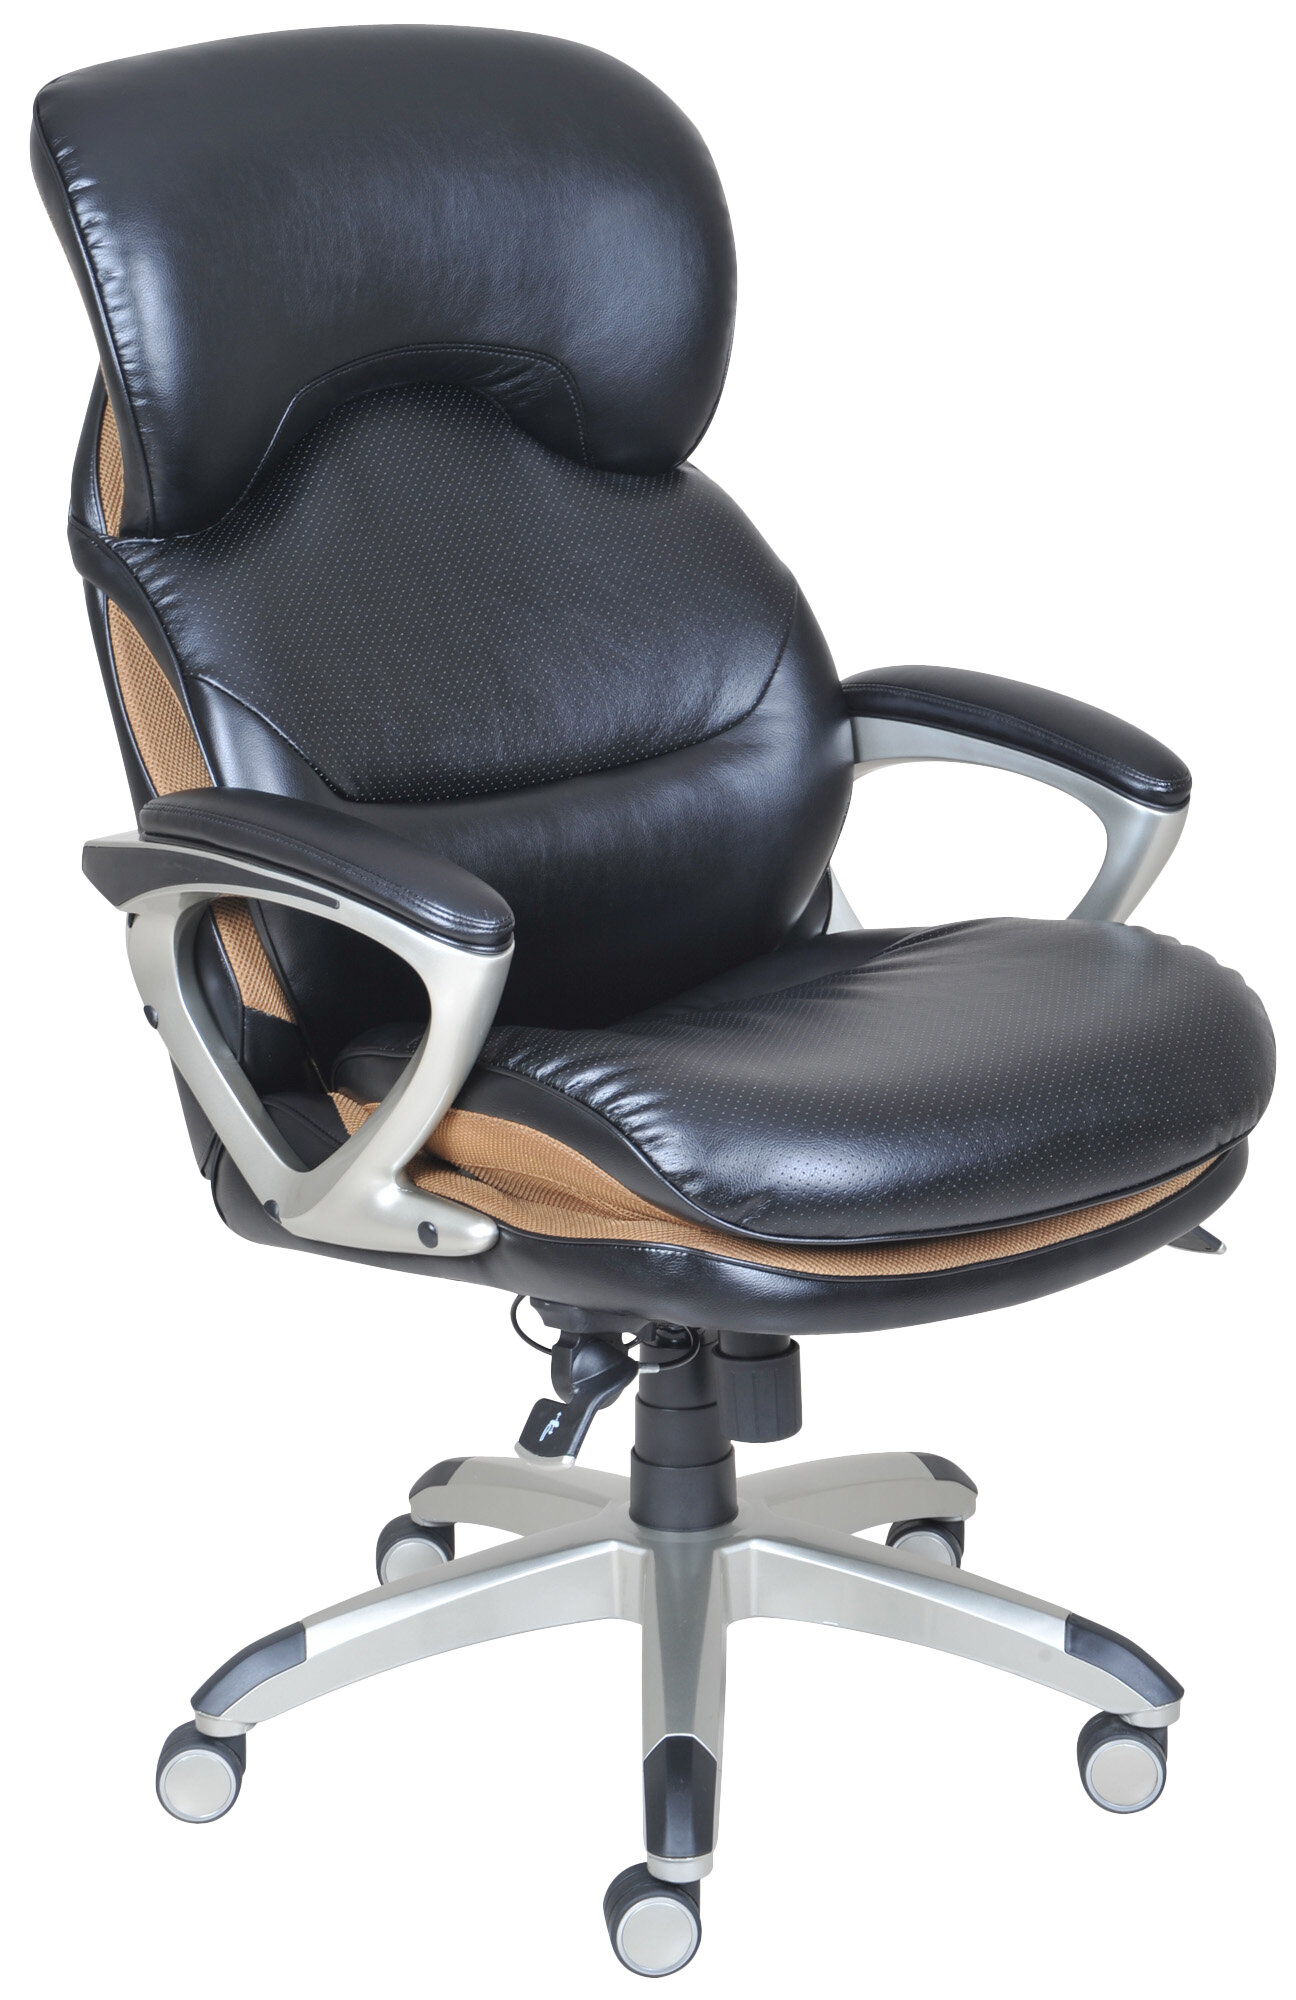 Serta at Home High Back Leather Executive Office Chair